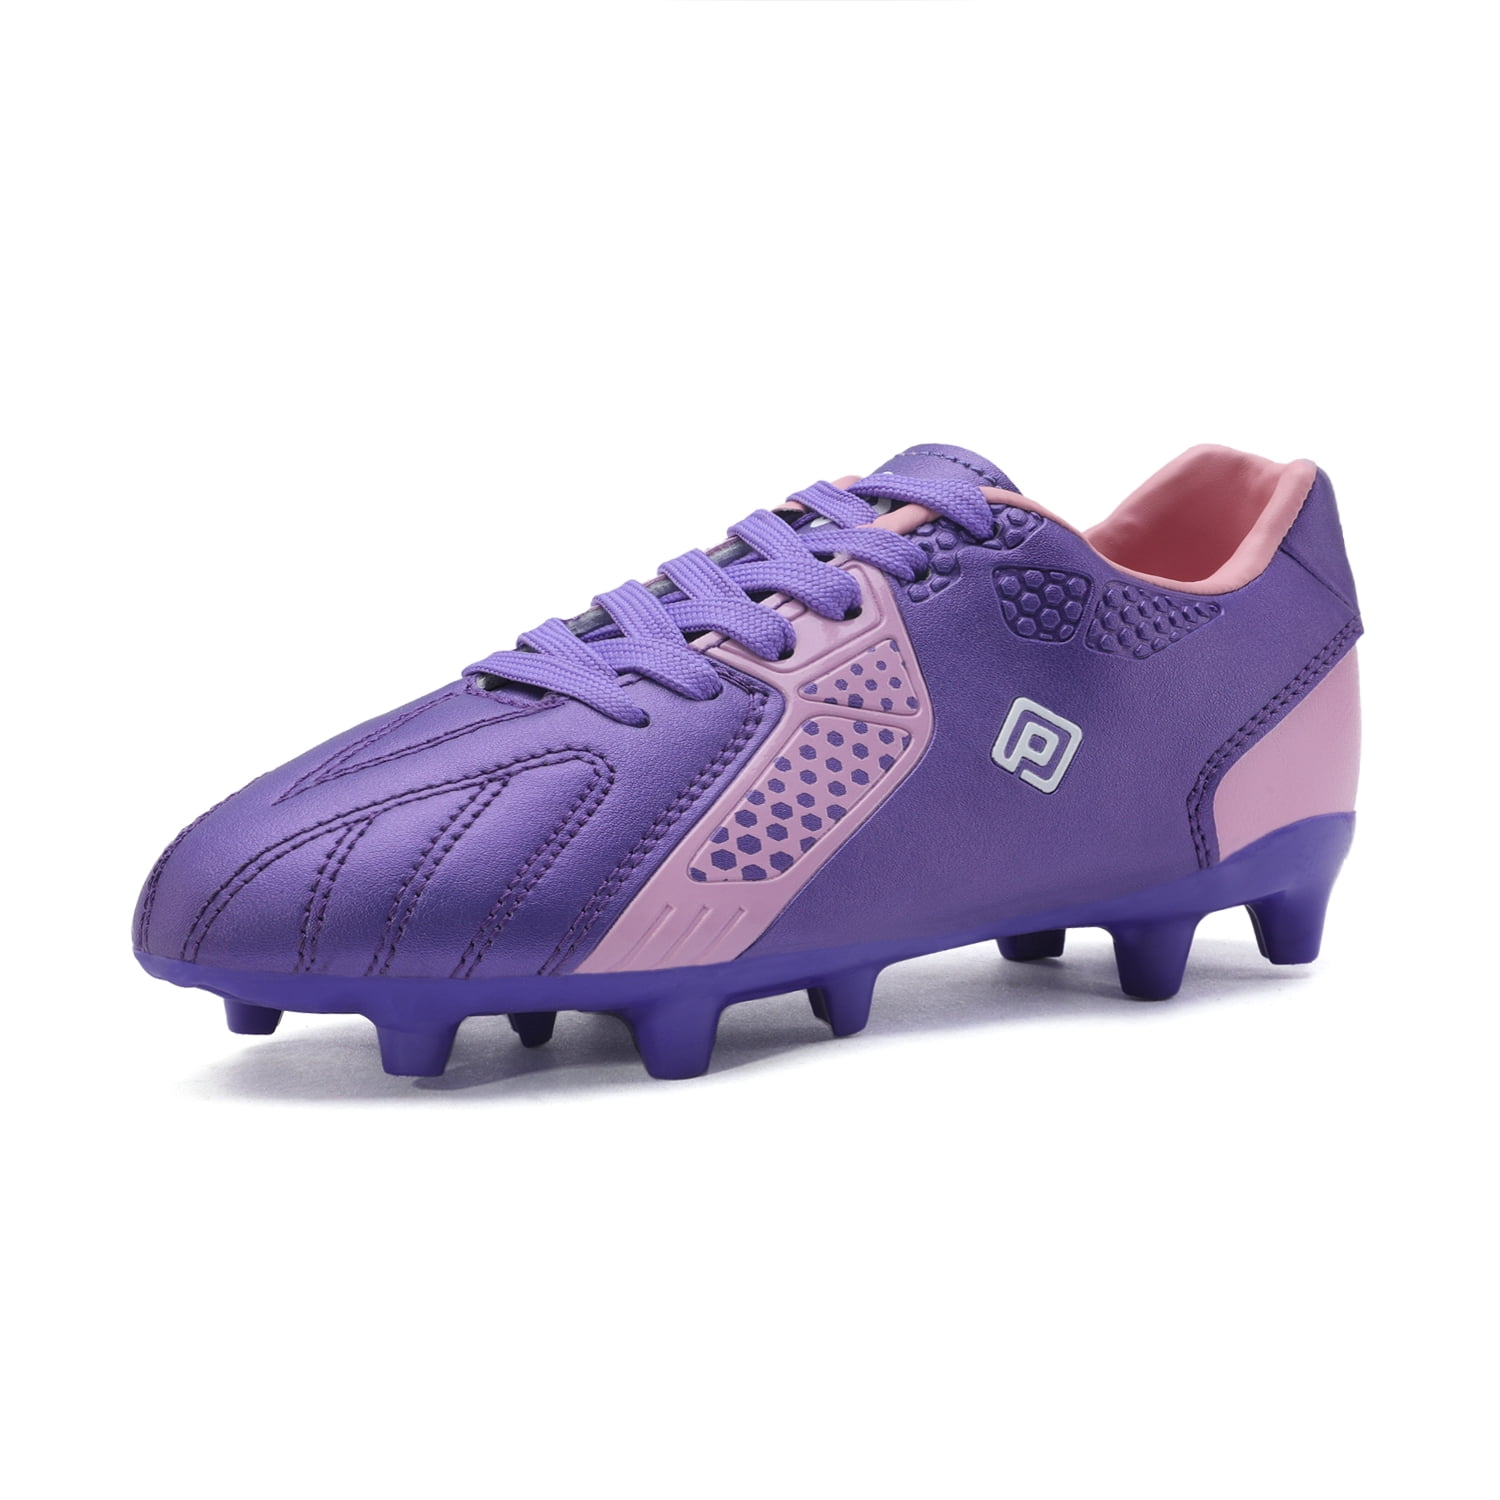 DREAM PAIRS Boys Girls Soccer Football Cleats Shoes 